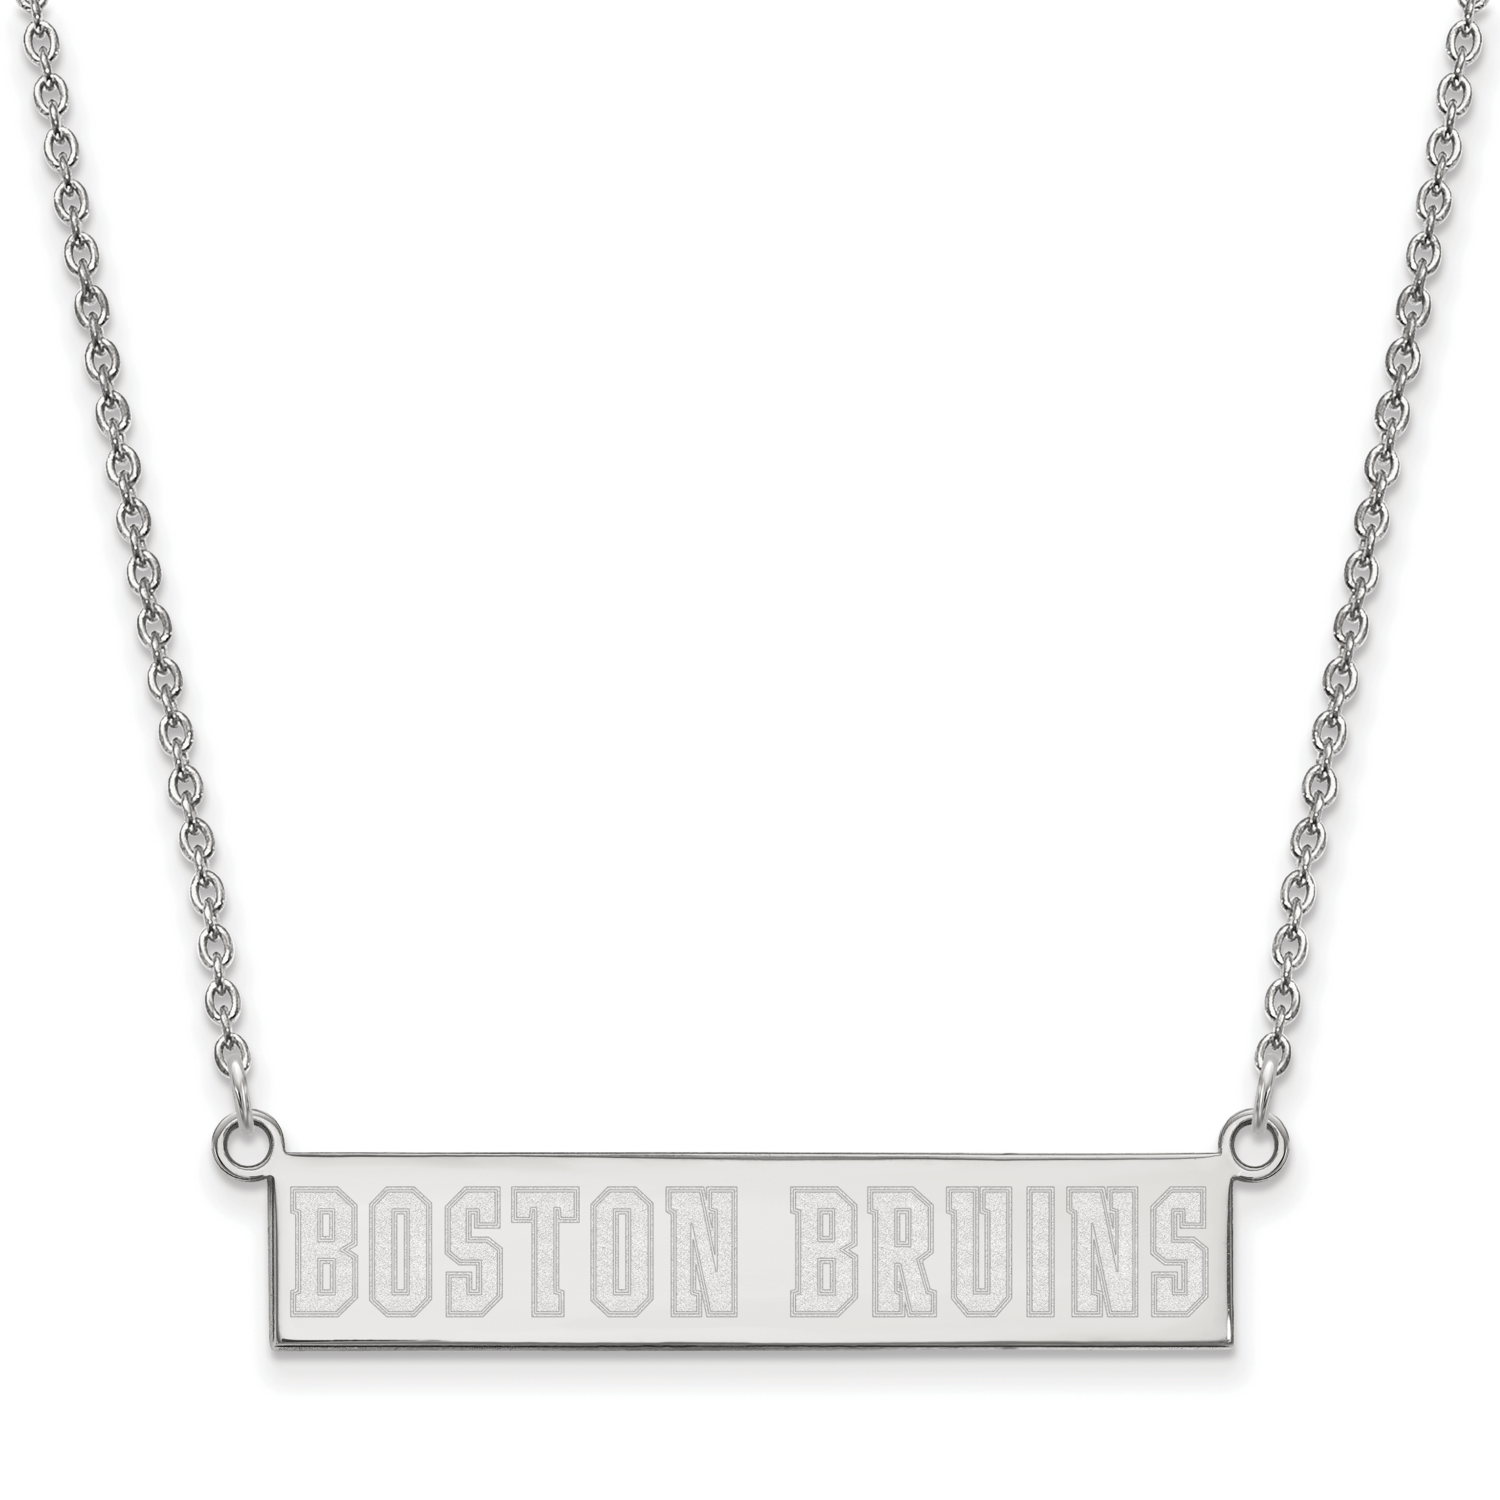 Boston Bruins Small Bar Necklace Sterling Silver Rhodium-plated SS046BRI-18